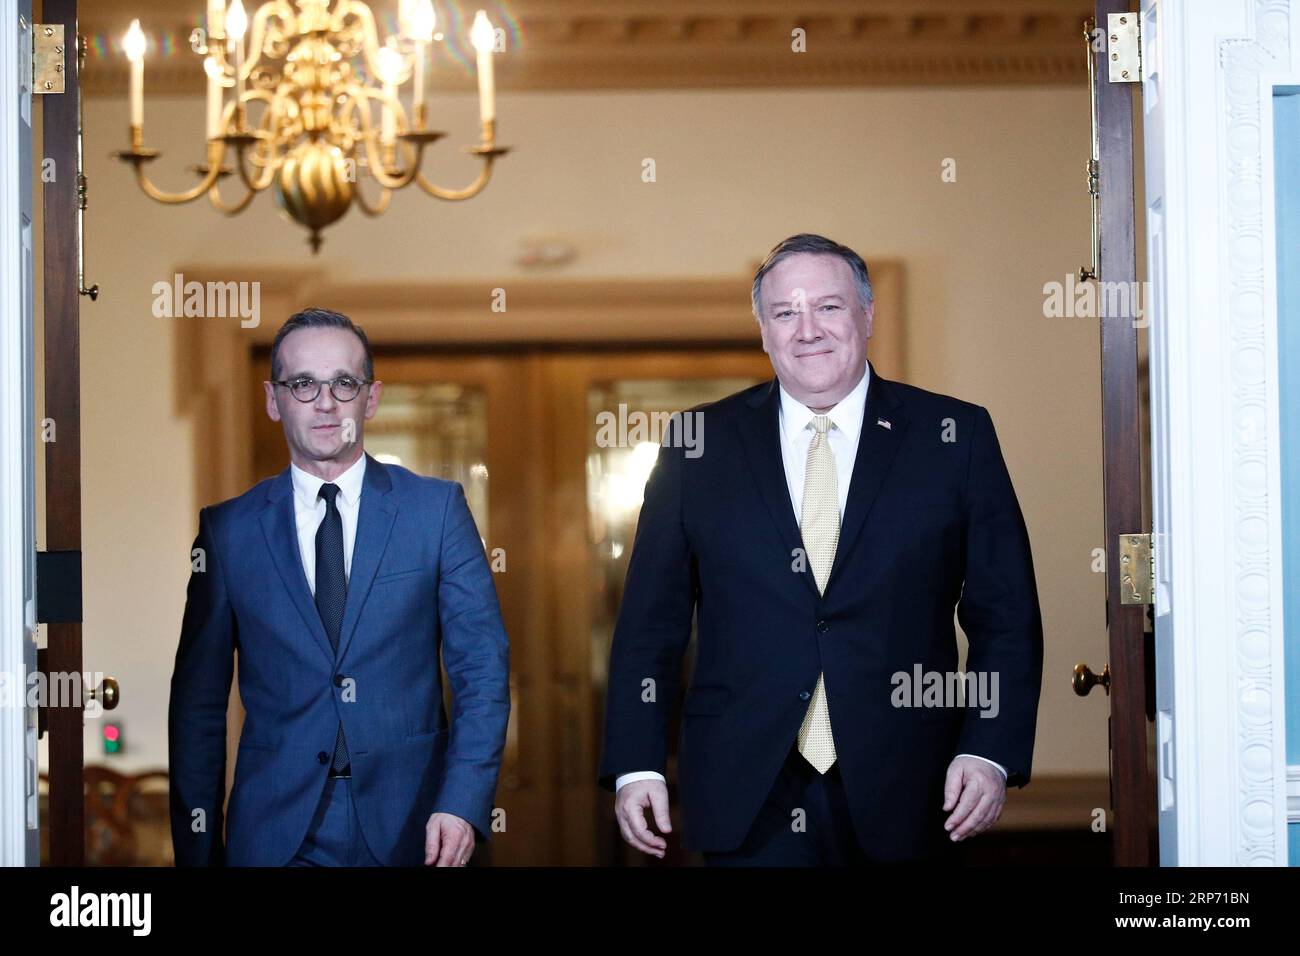 (190124) -- WASHINGTON, D.C., Jan. 24, 2019 -- U.S. Secretary of State Mike Pompeo (R) meets with German Foreign Minister Heiko Maas at the Department of State in Washington, D.C. Jan. 23, 2019. ) U.S.-WASHINGTON, D.C.-GERMAN FM-MEETING TingxShen PUBLICATIONxNOTxINxCHN Stock Photo